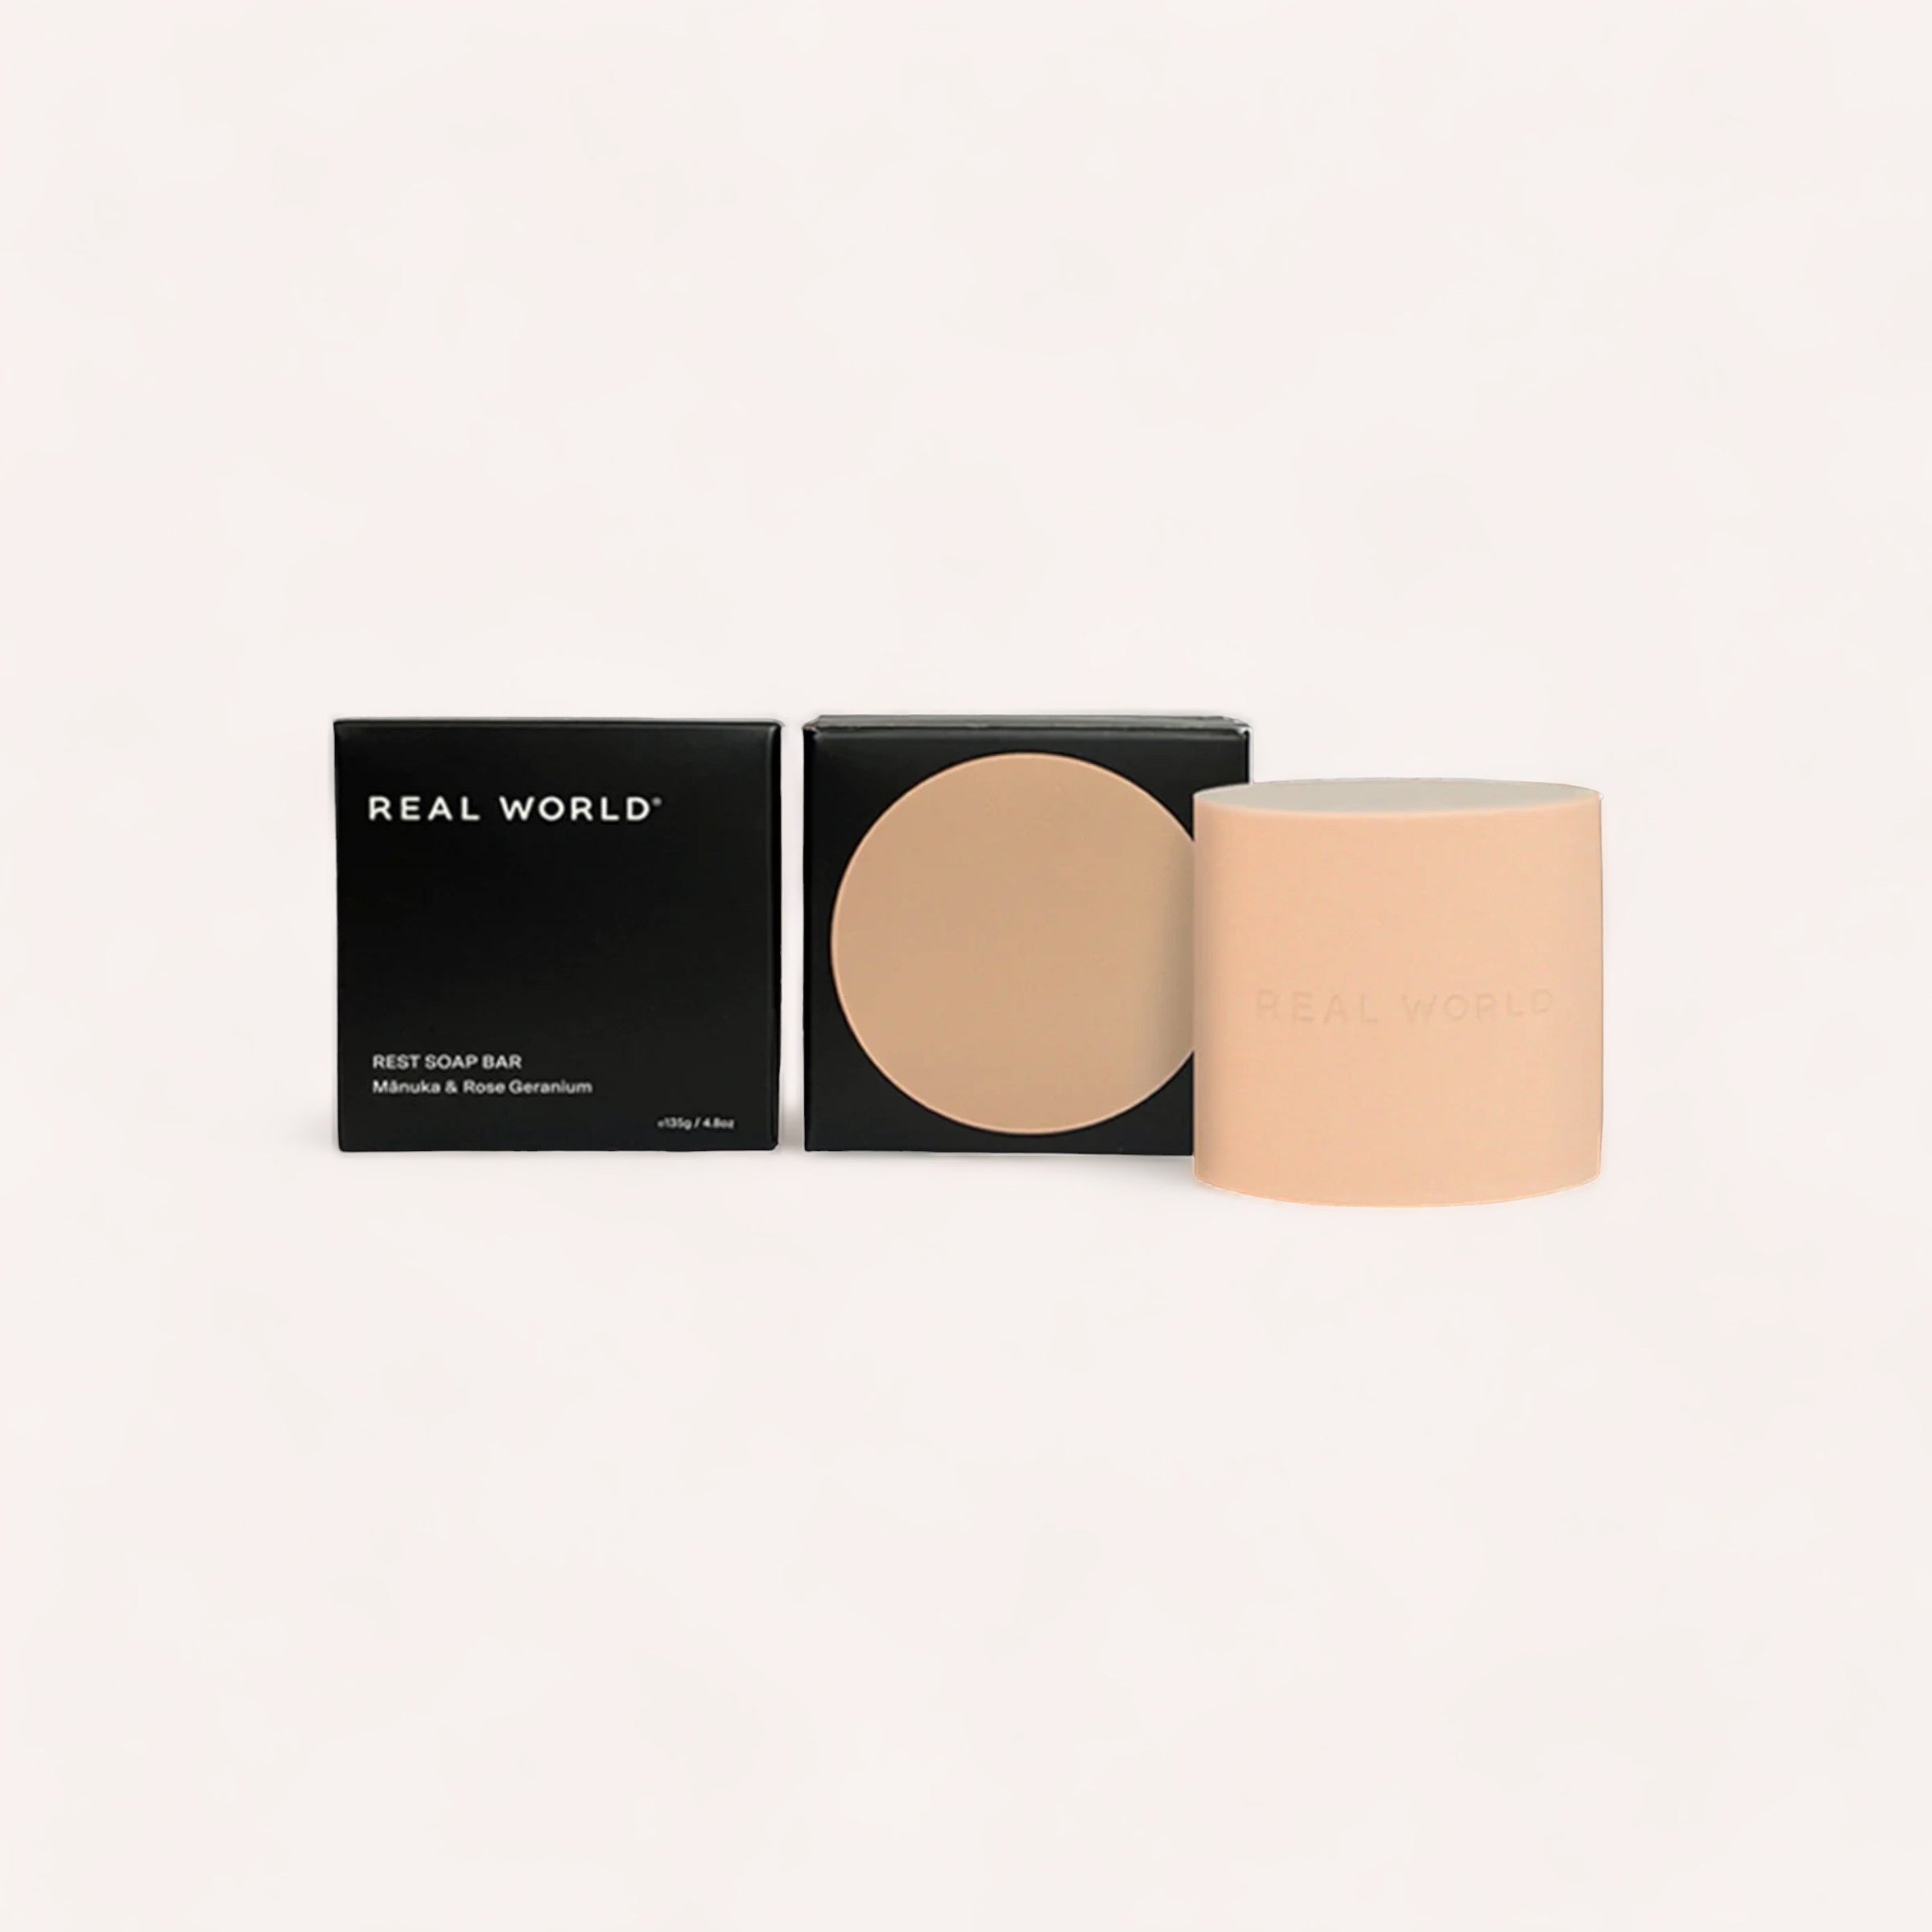 Minimalist skincare products with clean, modern packaging on a neutral background, featuring the healing properties of Manuka & Rose Geranium Soap Bar from Real World.